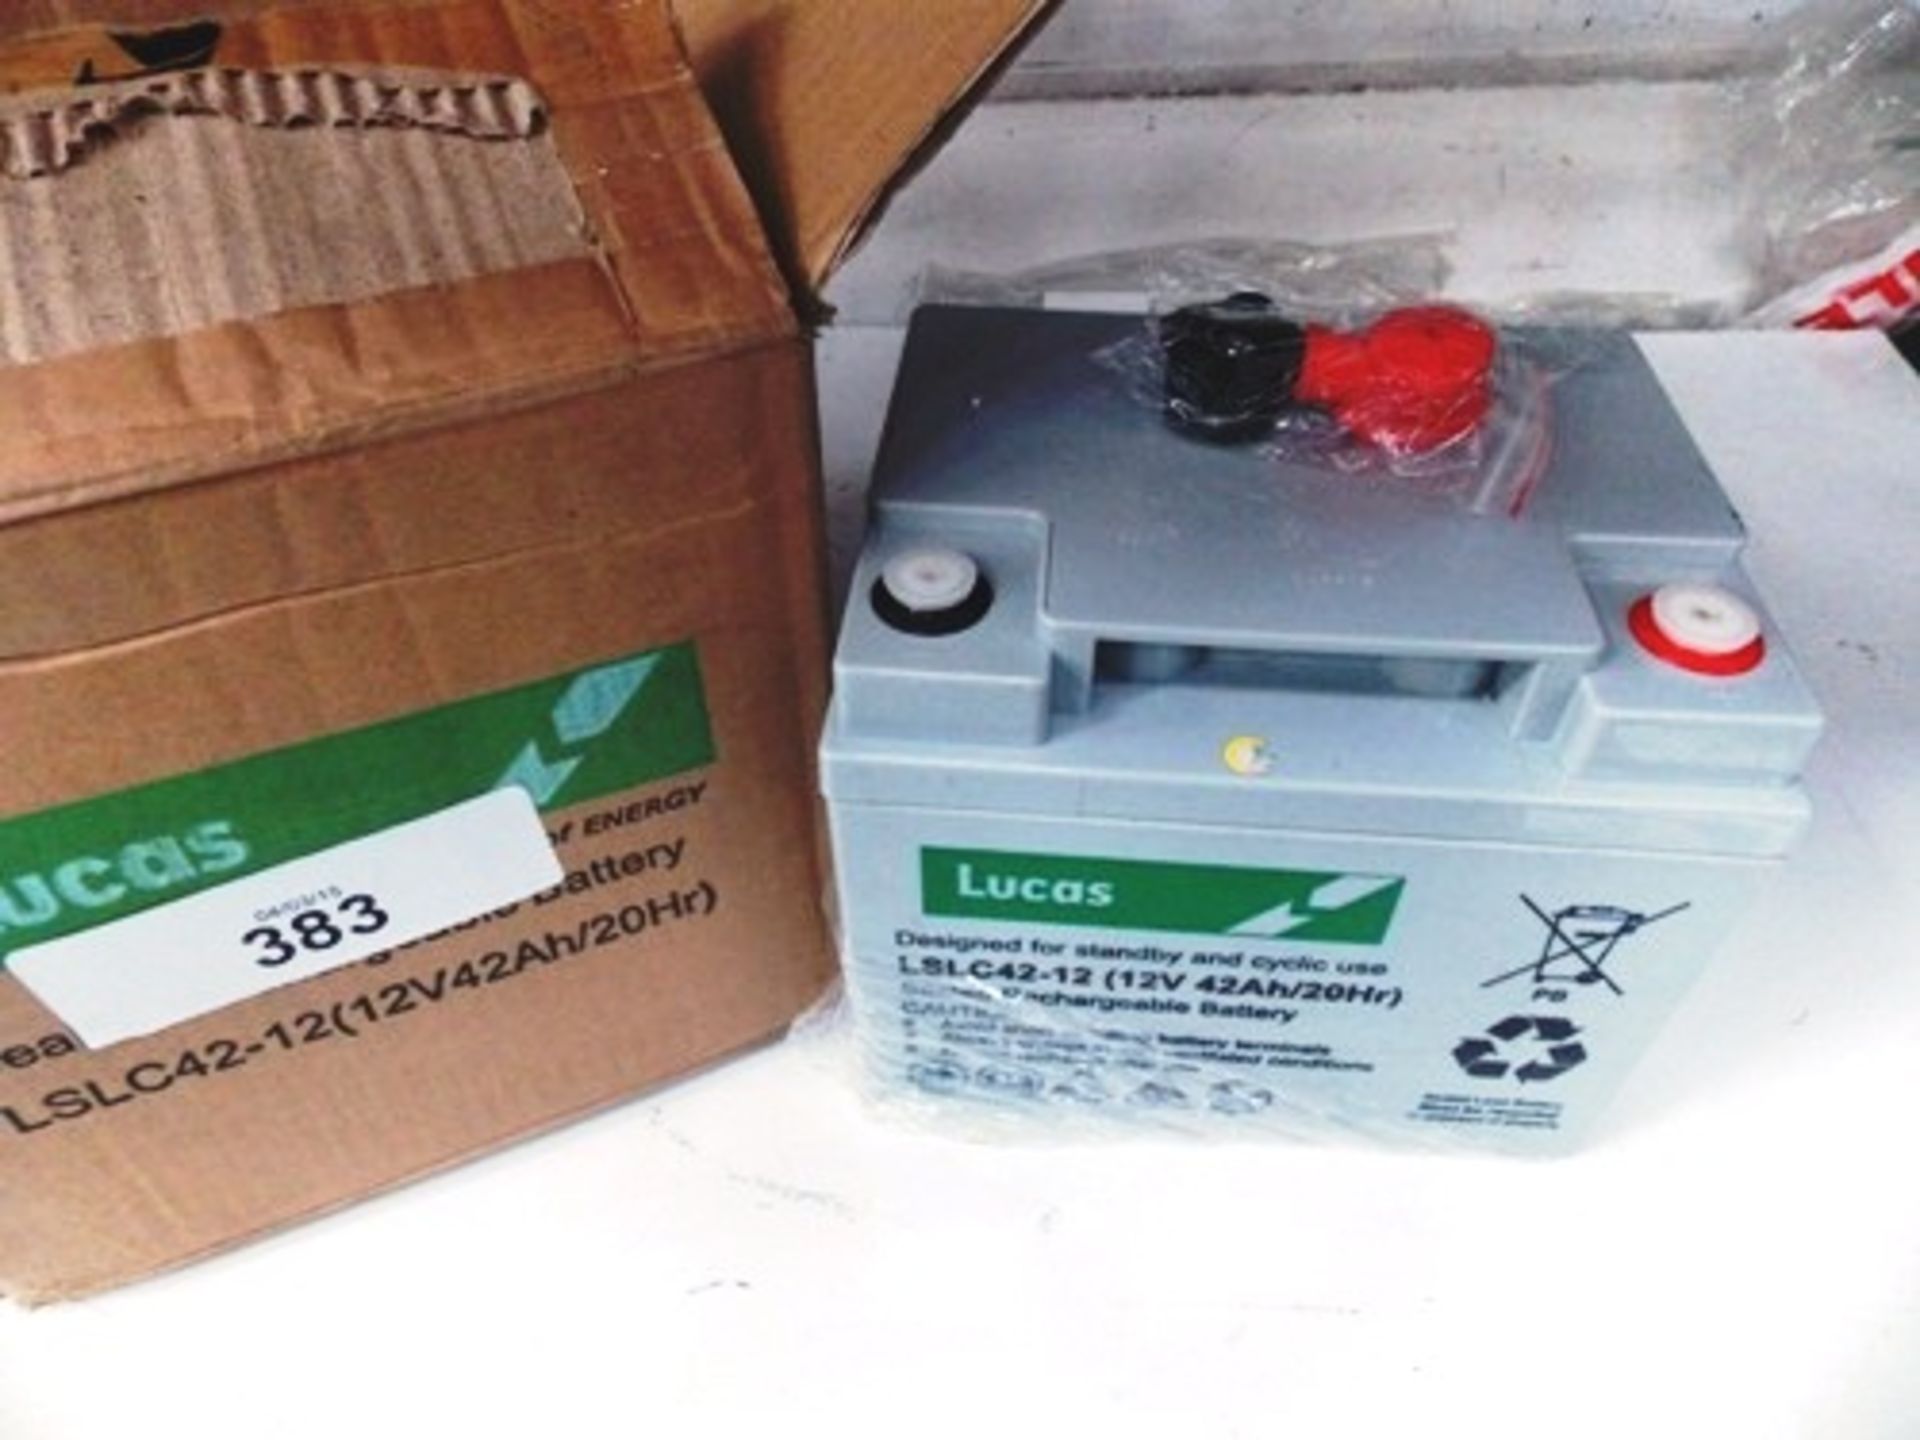 Lucas sealed 12V/42Ah rechargeable battery, model LSLC42-12 - New in box